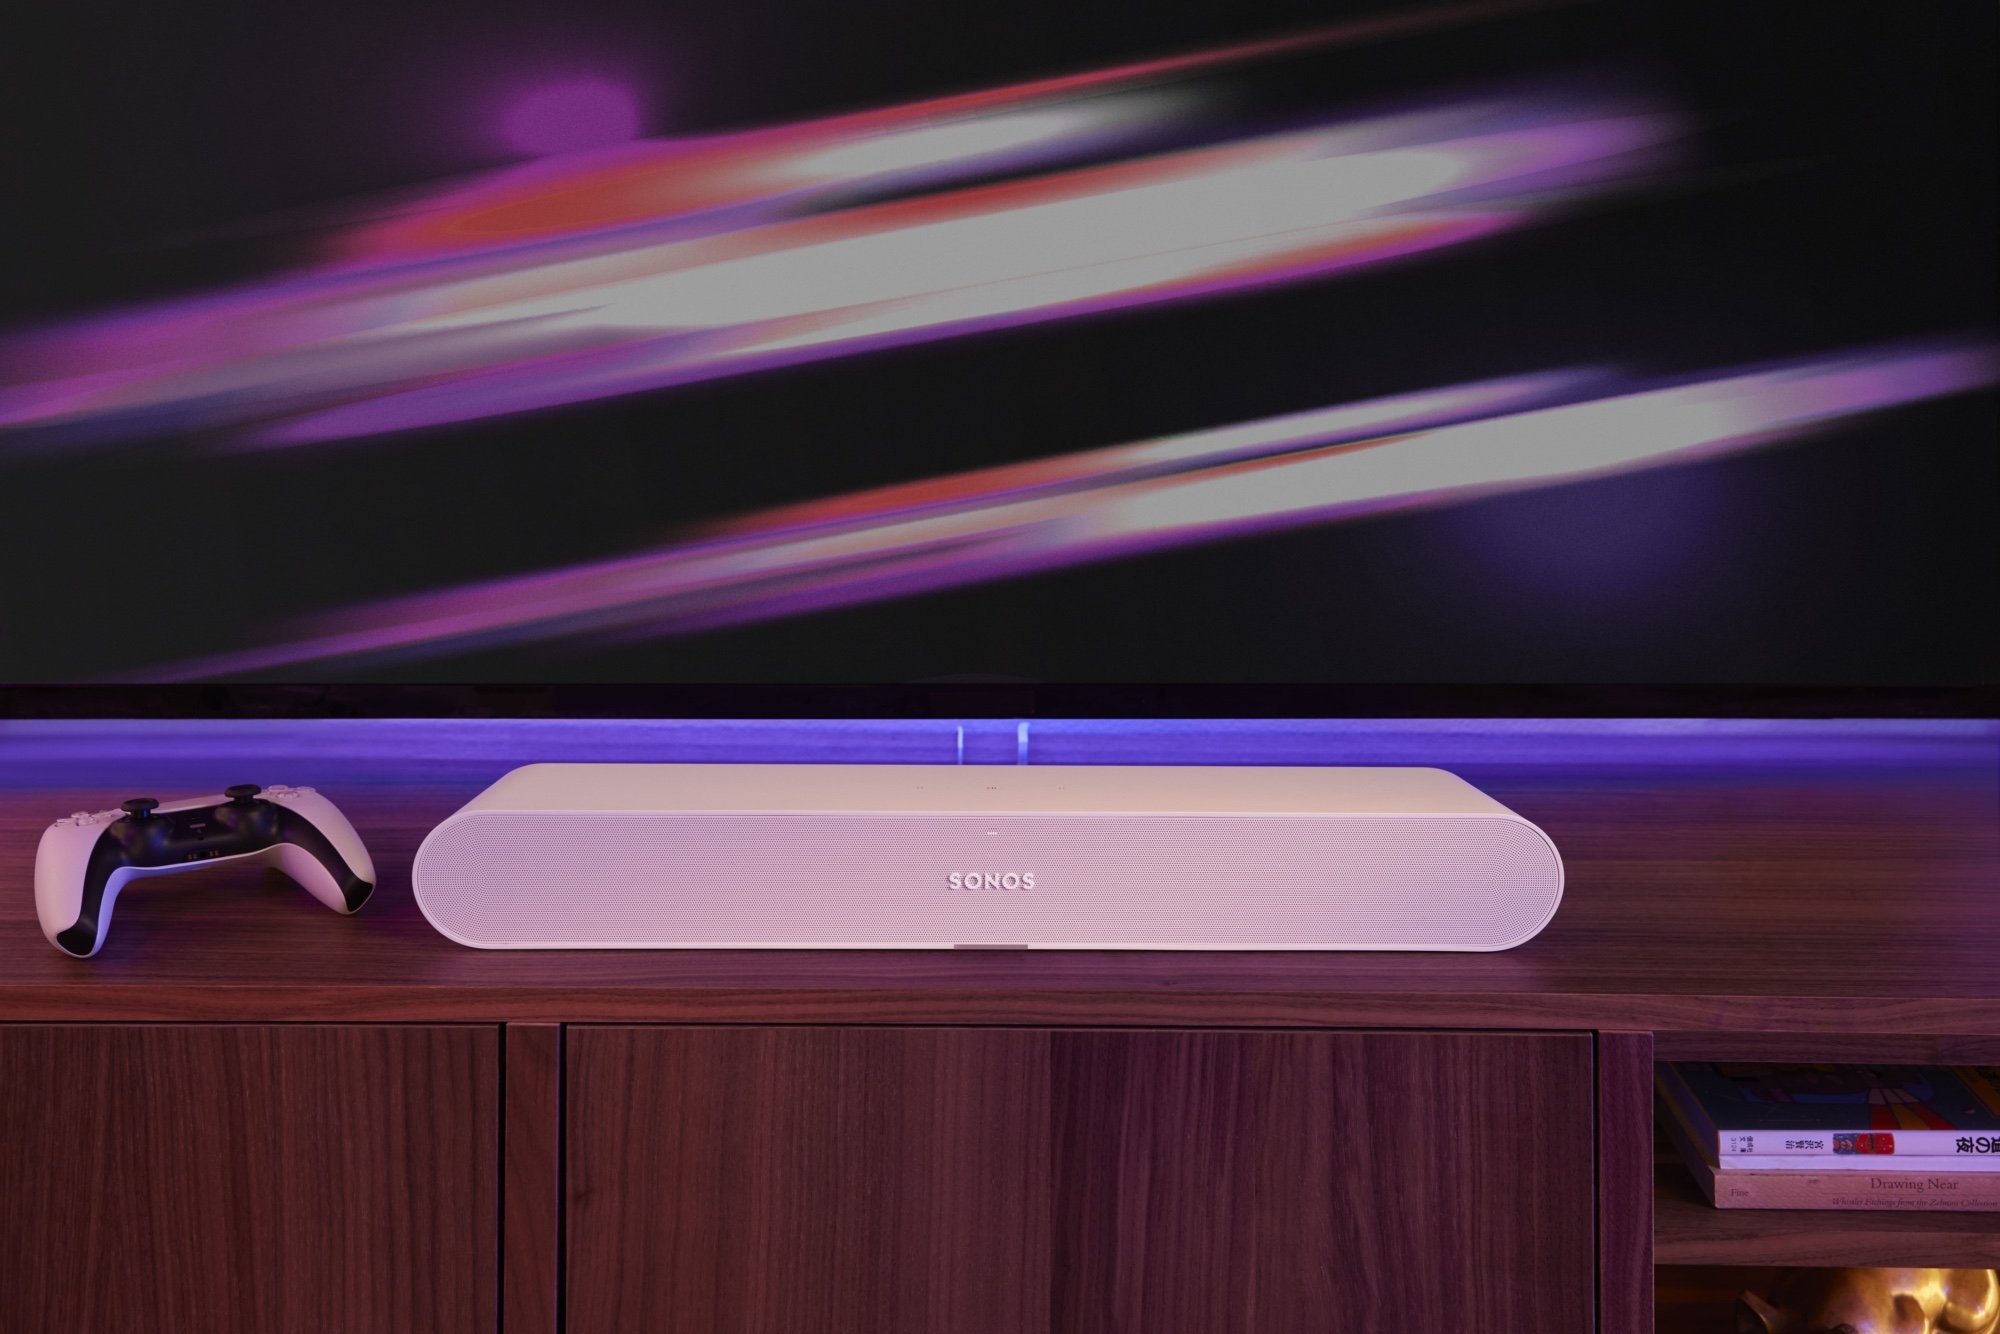 the sonos ray is just $400 and arrives in Australia on 8th June